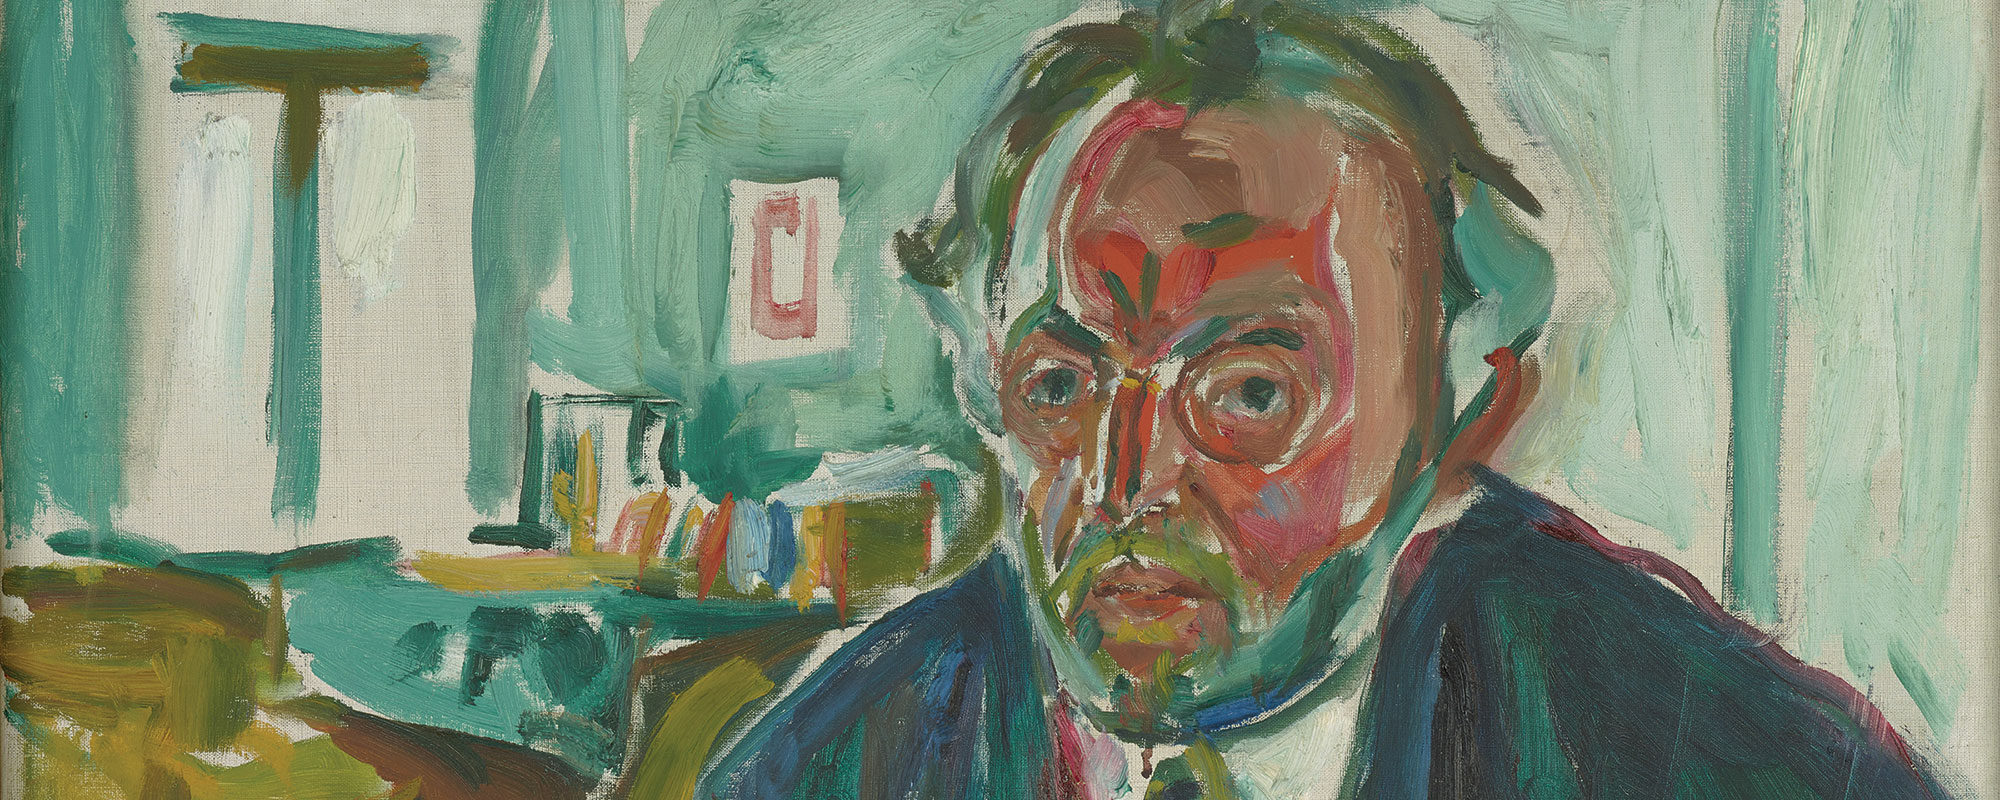 Painting of a man's face using broad brush strokes.